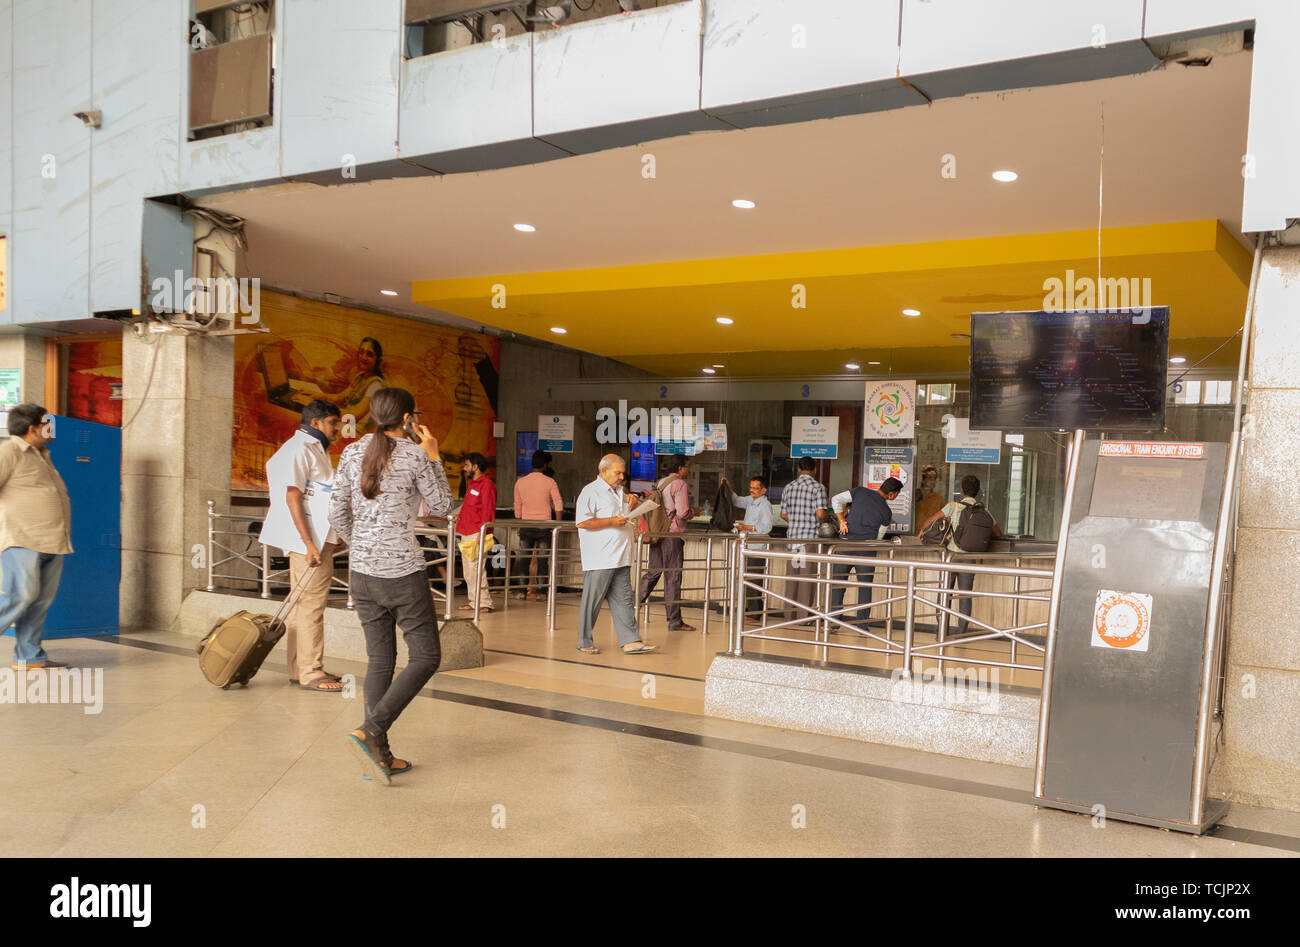 Bangalore India - June 3, 2019: Unidentified people at ticket counter to buy tickets at Bangalore railway station. Stock Photo